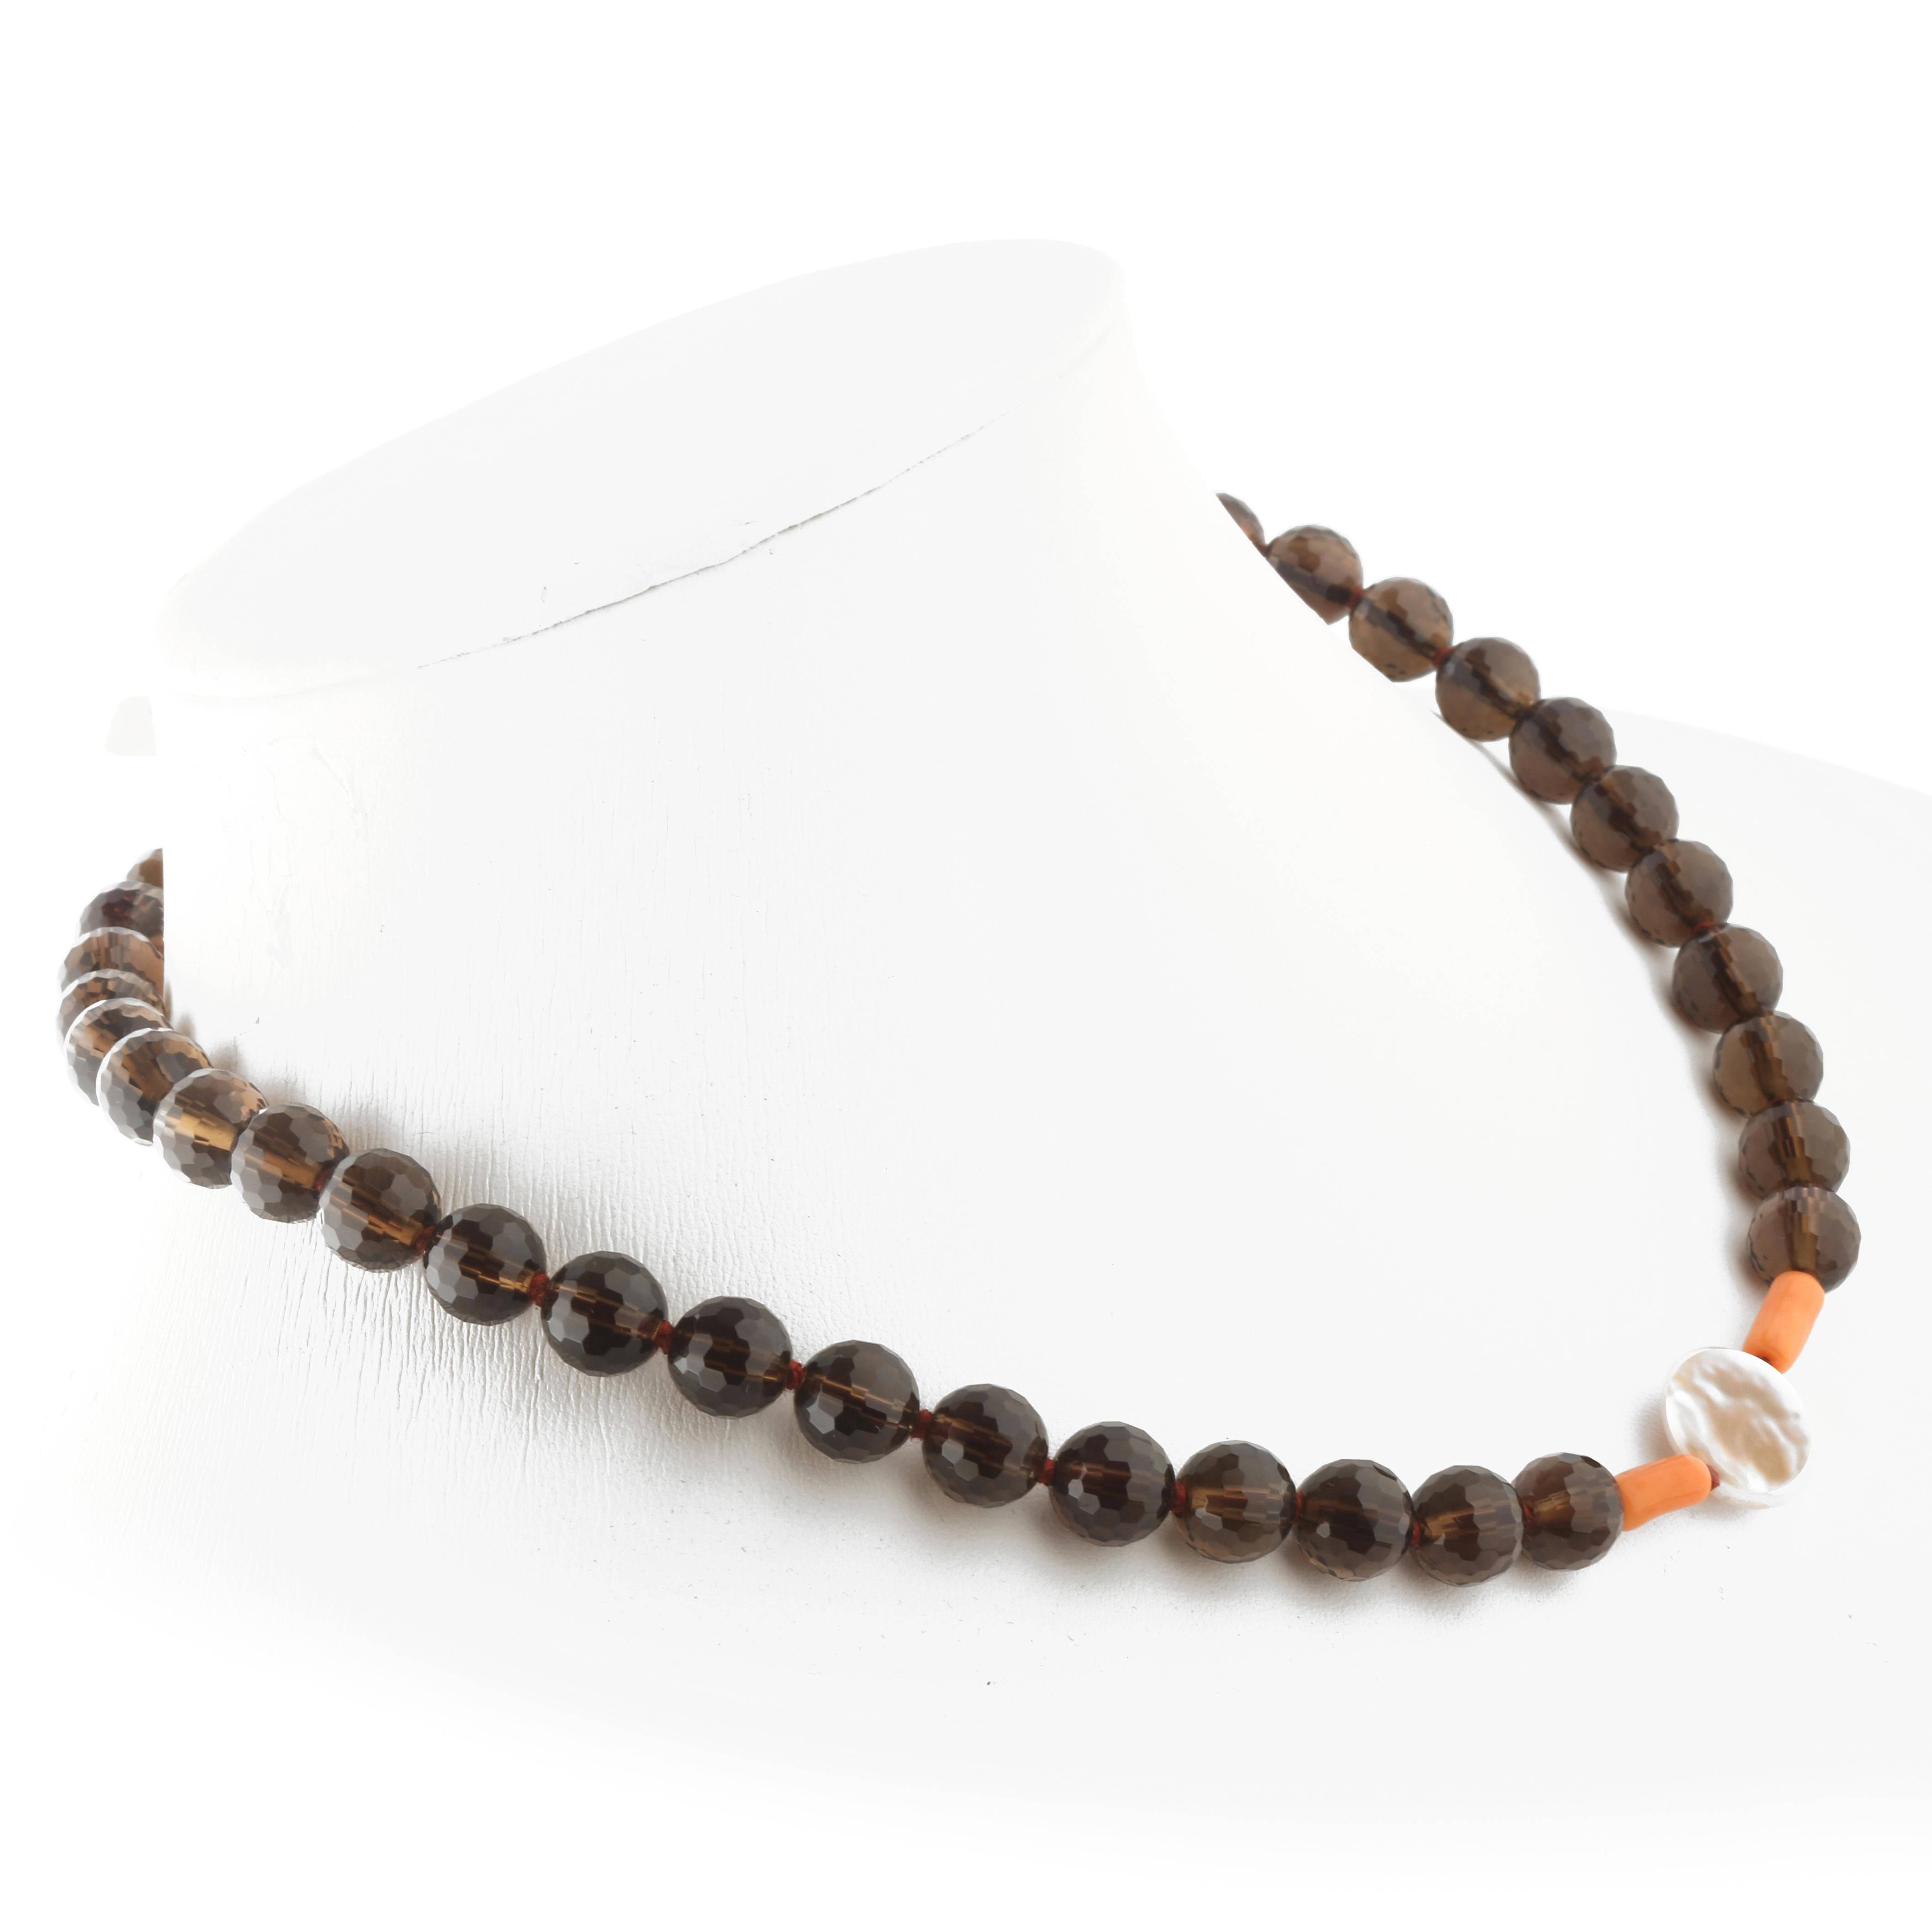 Autumn inspired necklace with beads of natural precious materials. Immerse yourself in the beauty of this uniquely designed necklace with natural stones full of life and color. 

Choker necklace with faceted Smoky Quartz, Natural Coral and a central